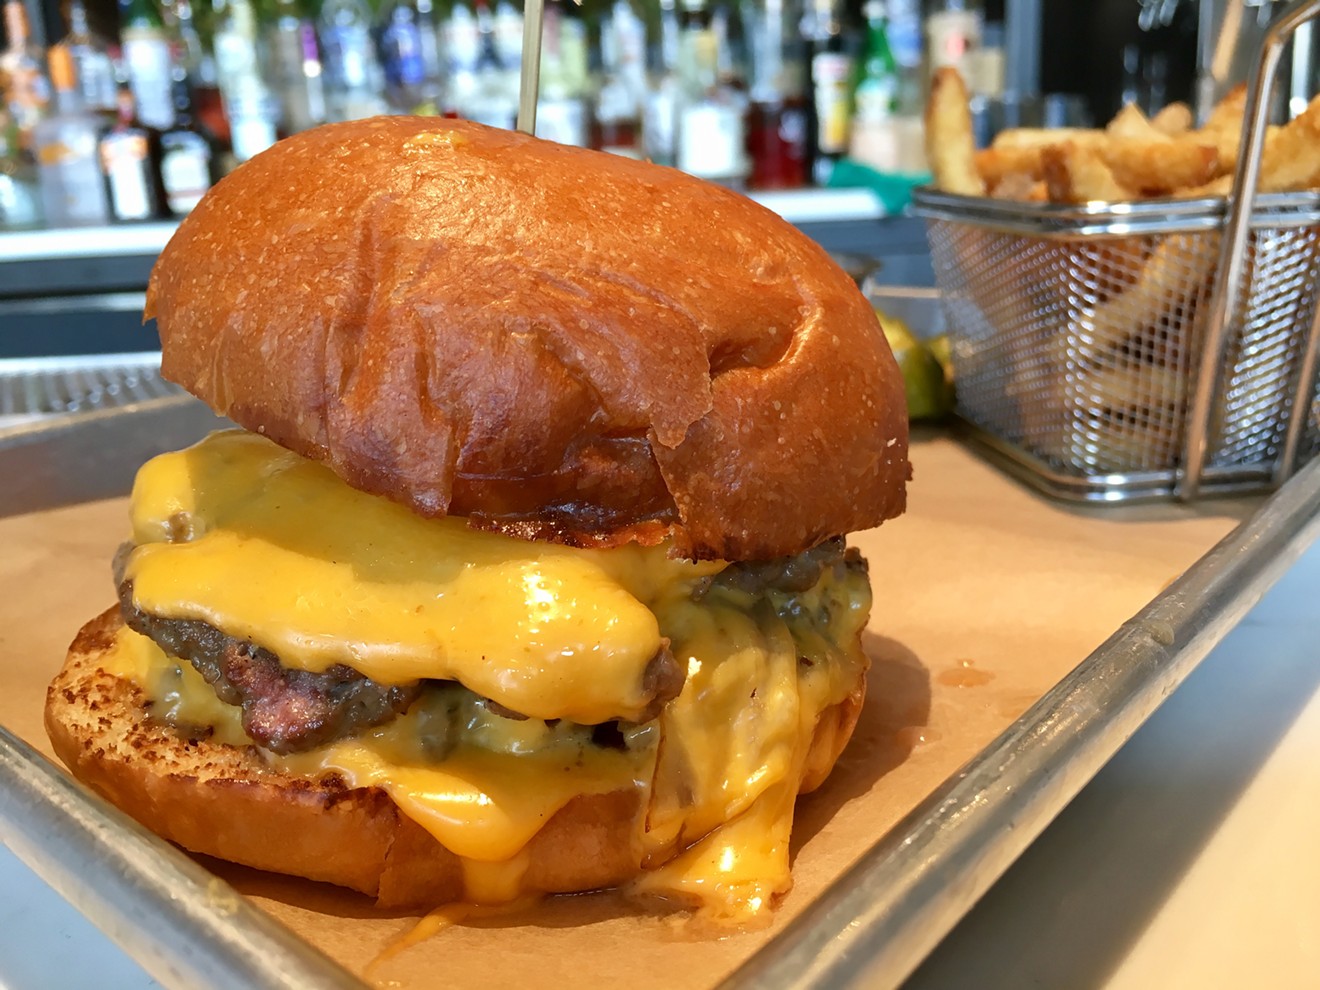 The double cheeseburger at Hide is $6 during happy hour or $11 after 7 p.m.